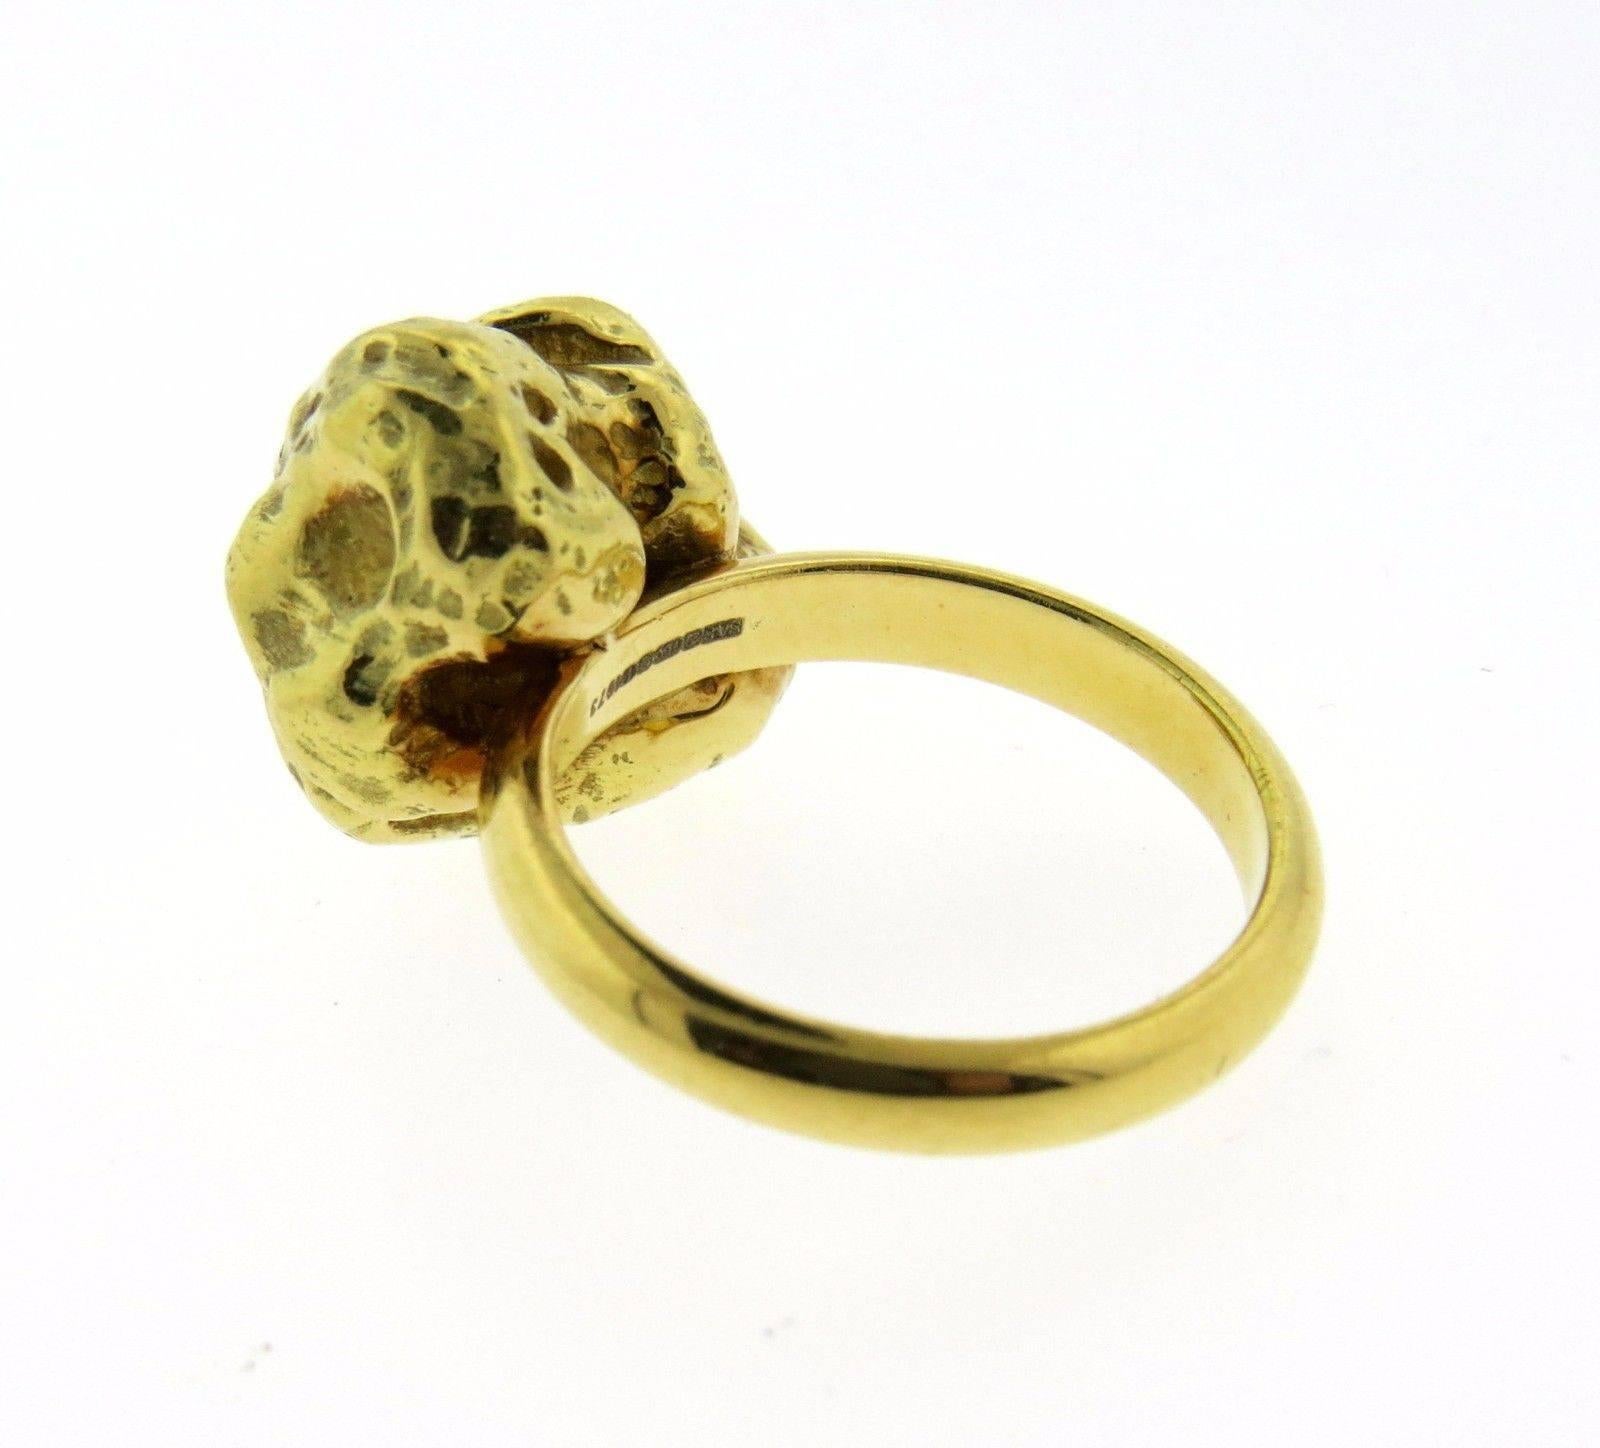 An 18K yellow gold nugget ring.  The ring is a size 6, top measures 15.8mm x 16mm.  The weight of the piece is 21.3 grams. 